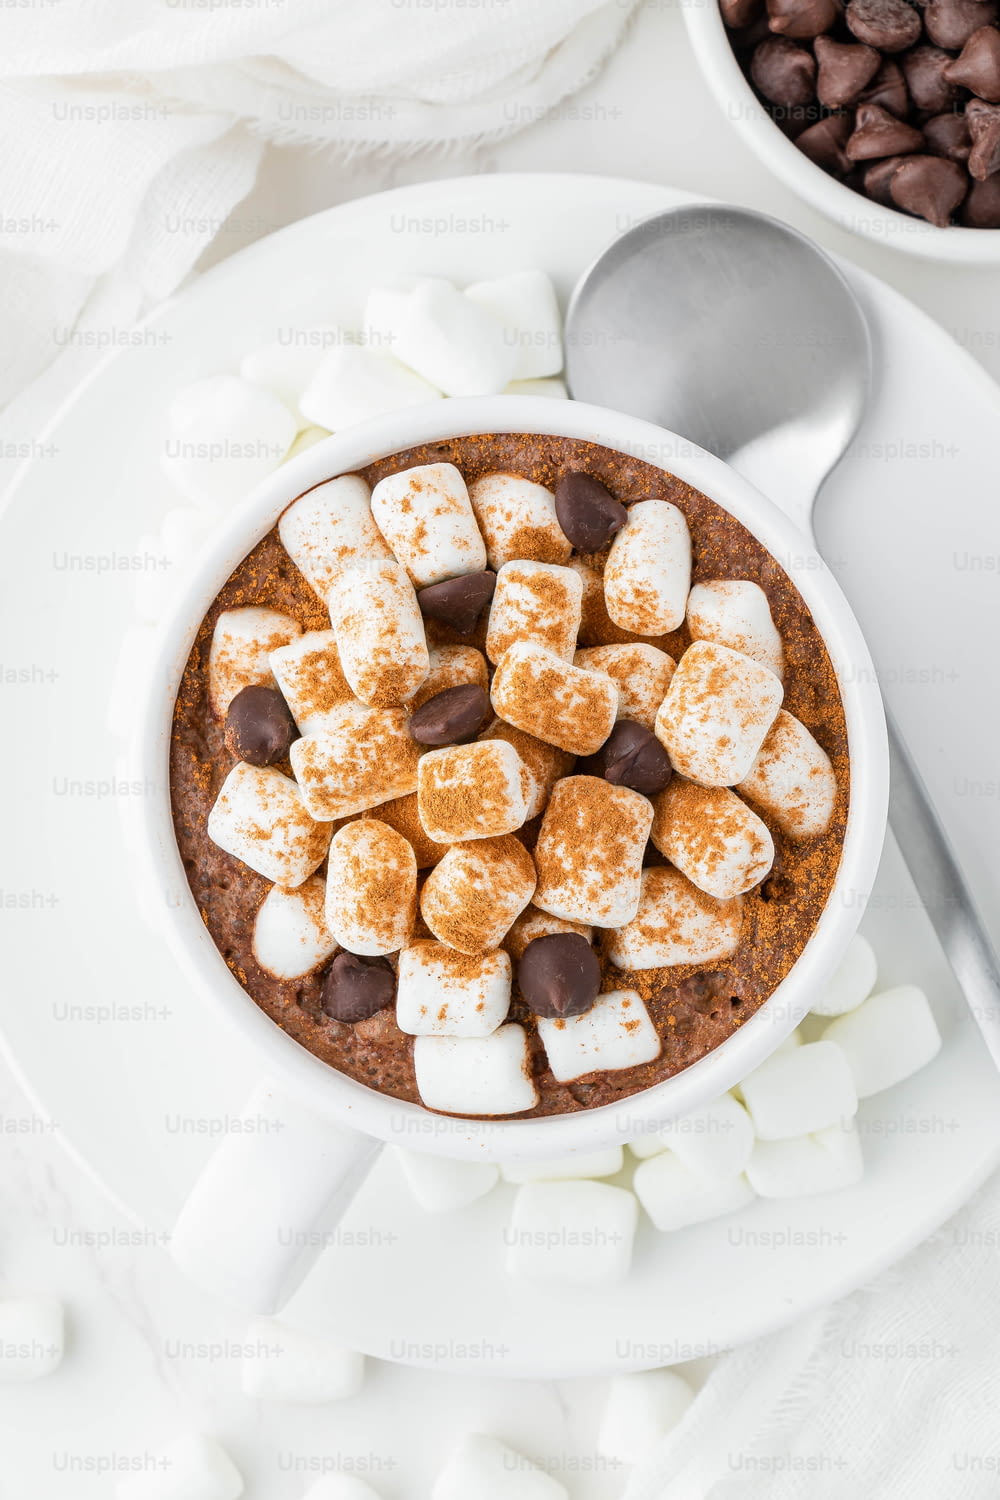 a bowl of hot chocolate and marshmallows on a plate